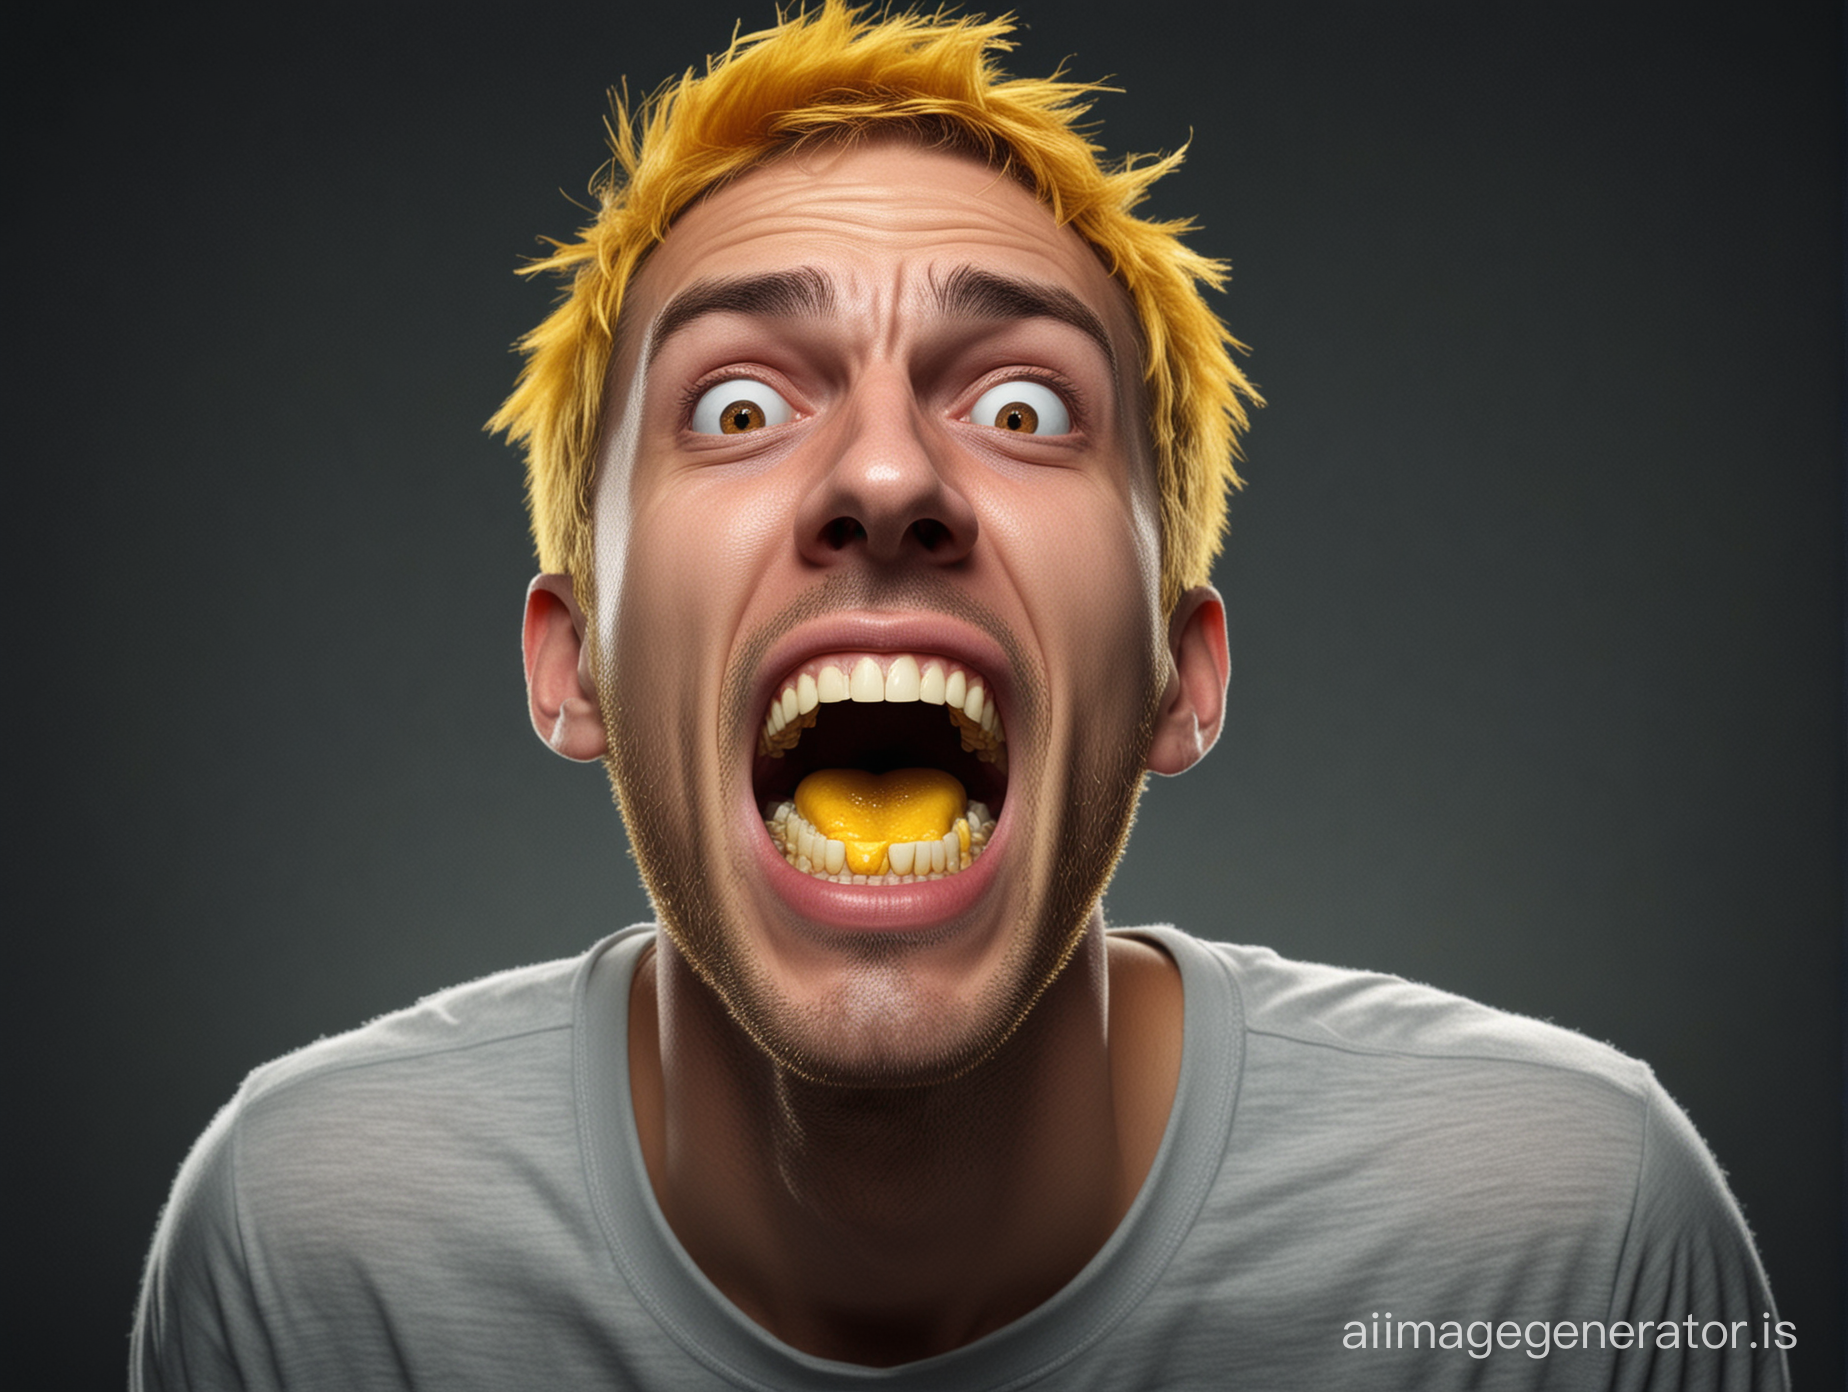 create a 3D image illustration of a man with a shocked face waking up with big yellow stained teeth in a dark room